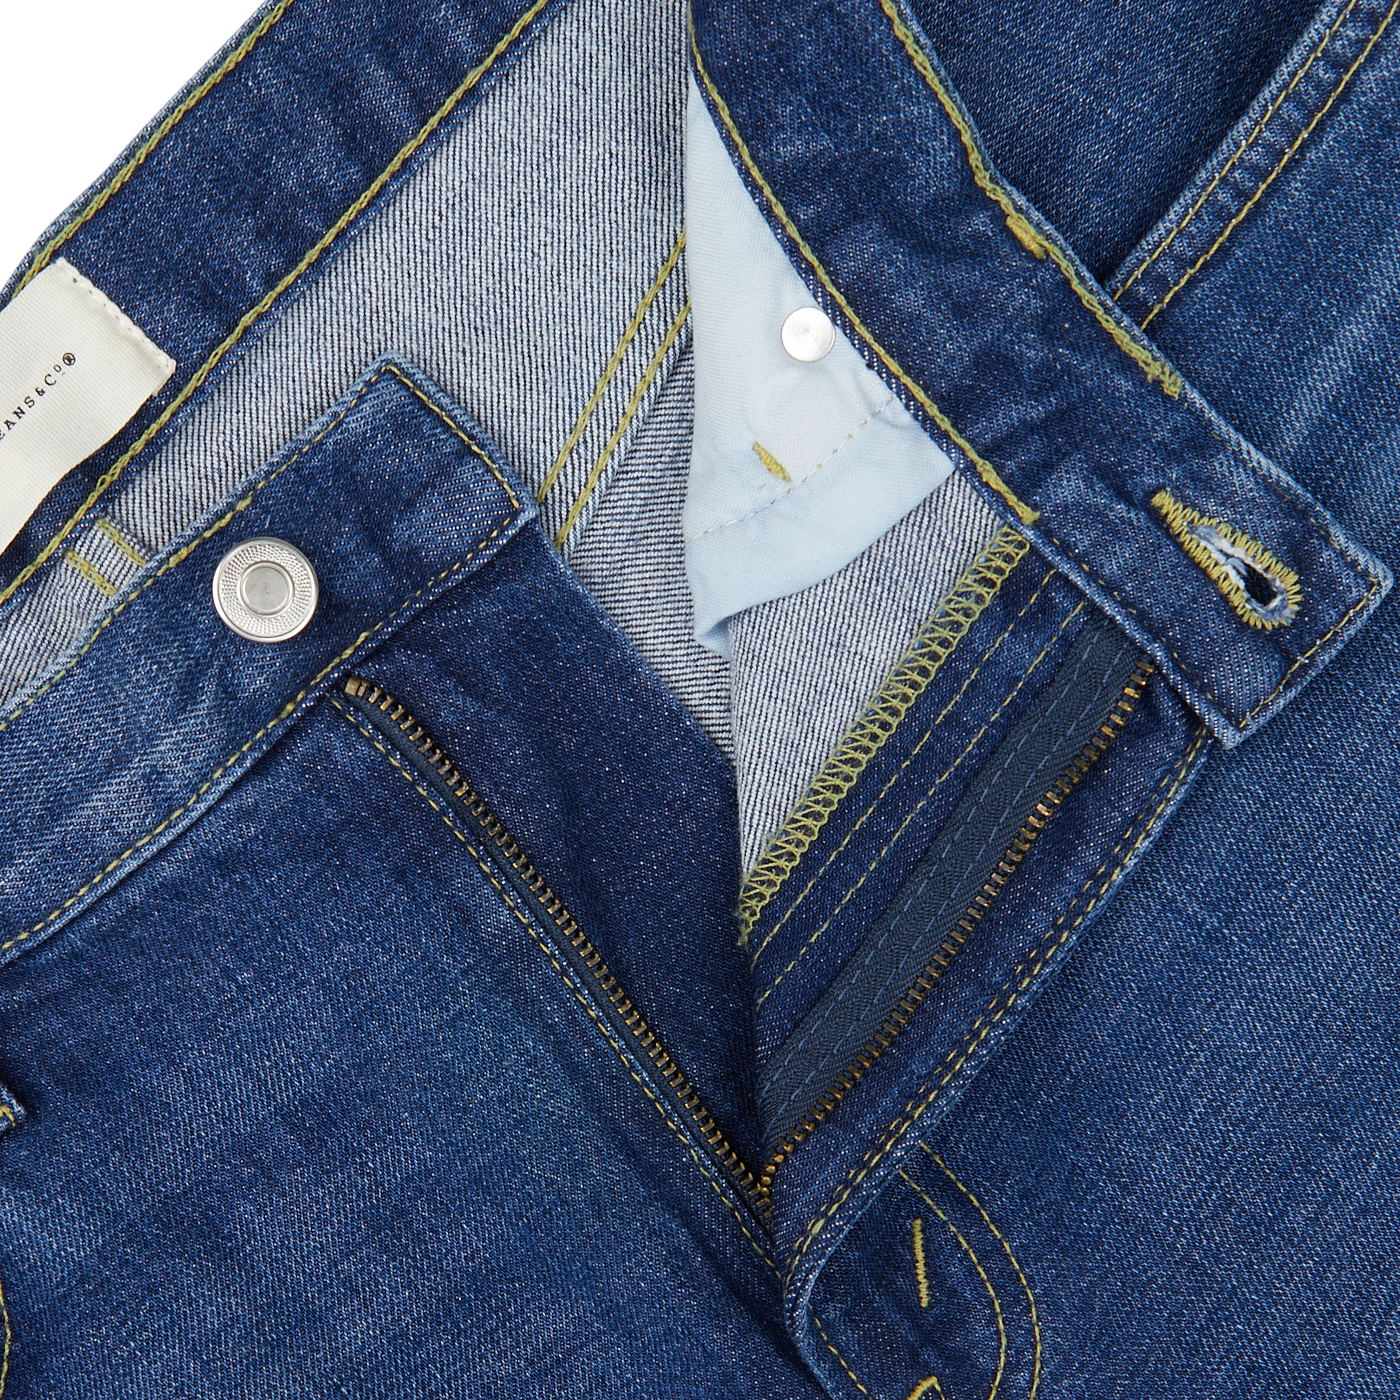 Close-up of a blue Jeanerica denim jacket with detailed stitching and a light blue shirt collar underneath, featuring the Medium Blue Washed Cotton TM005 Jeans.